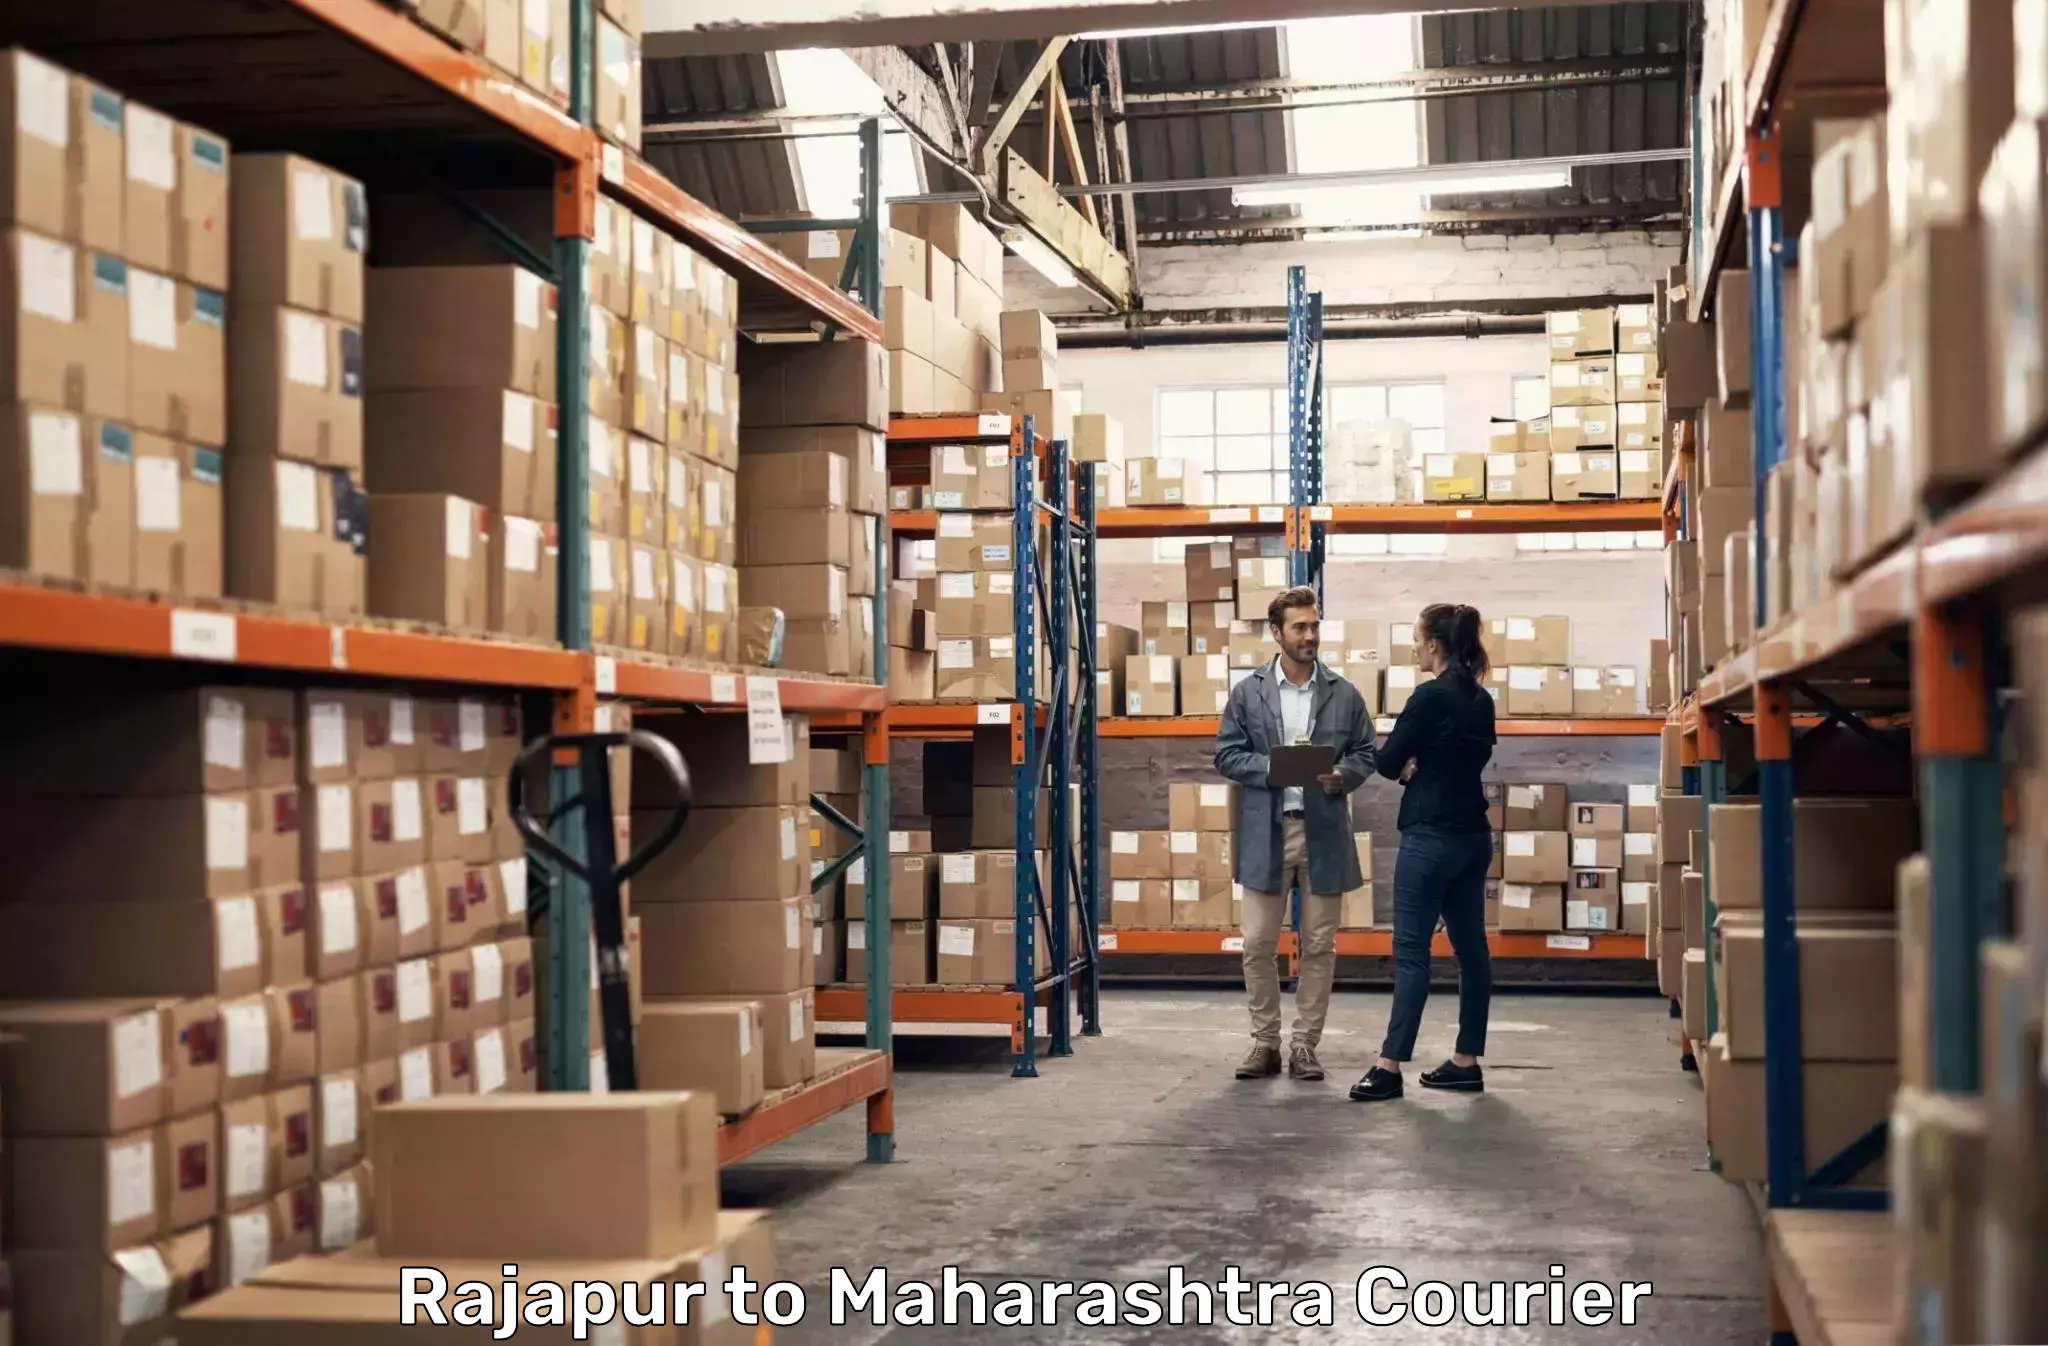 Courier service booking Rajapur to Pune